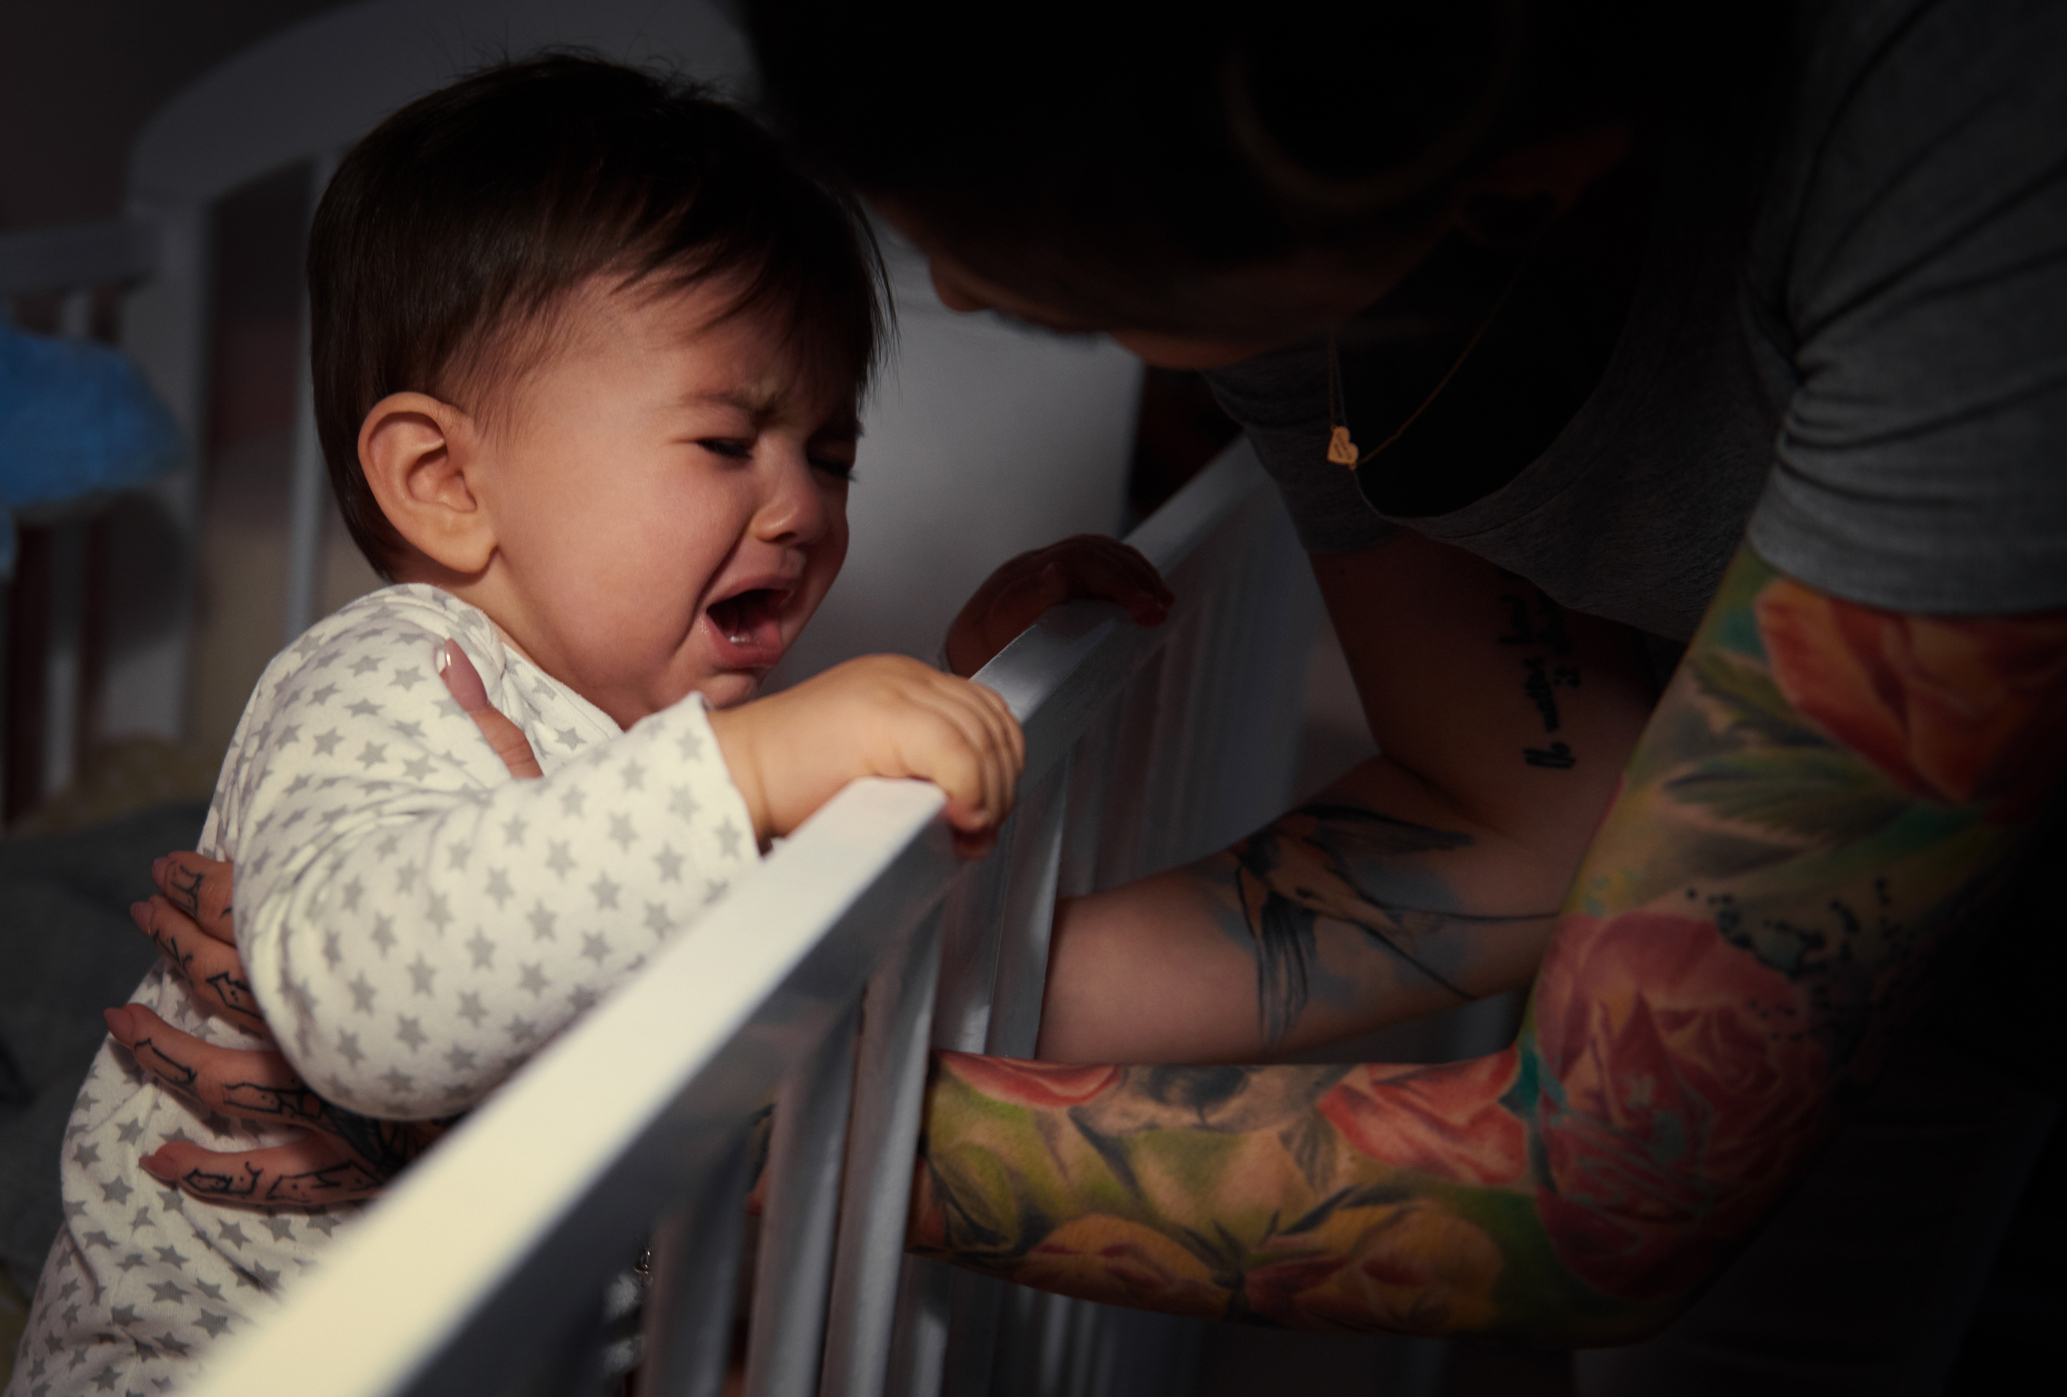 Fussy Baby at Night: Causes & Solutions